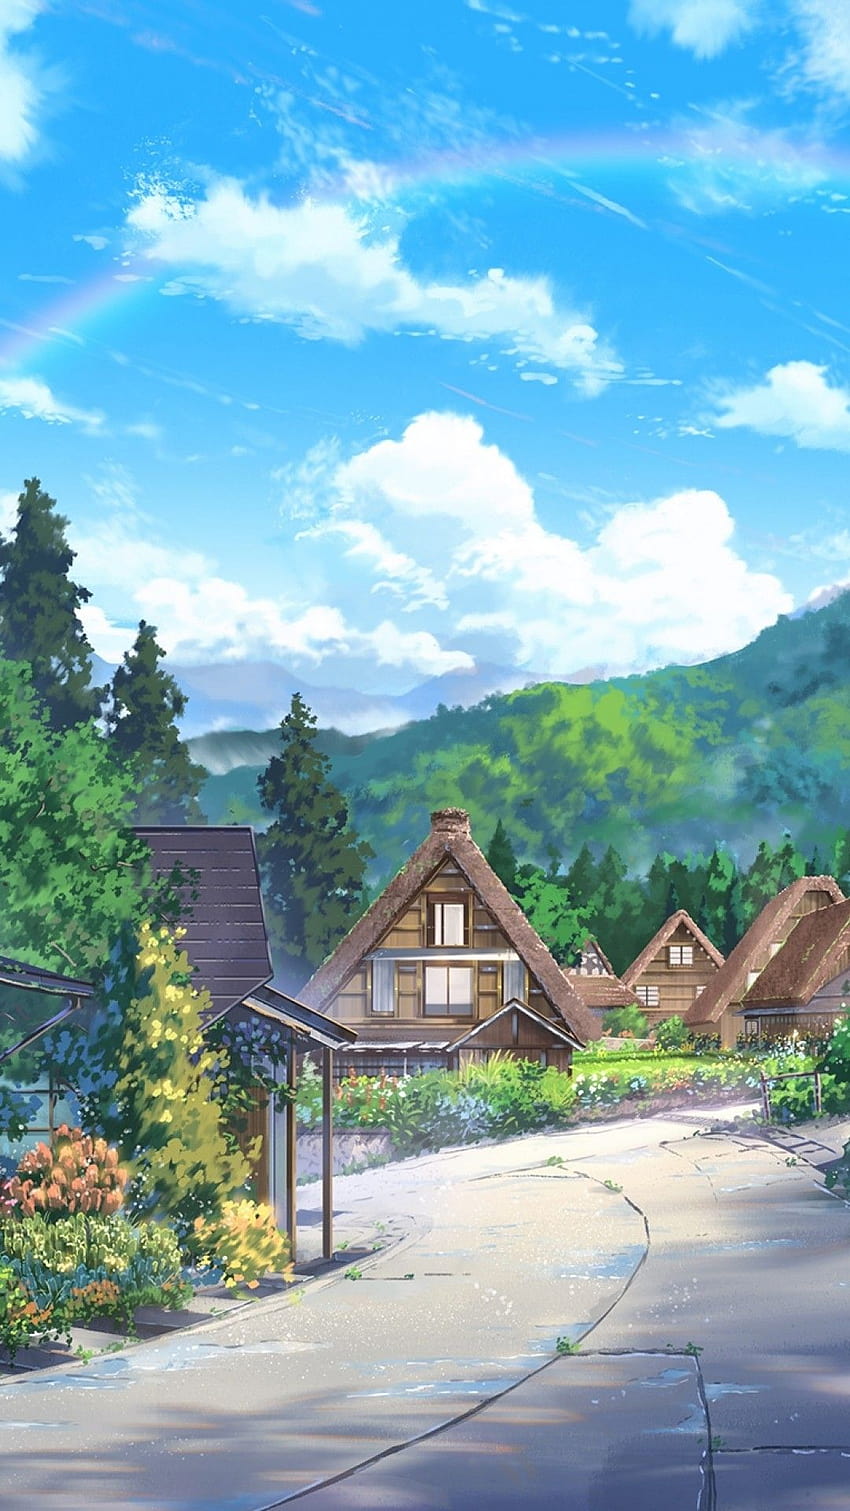 1080x1920 Anime Landscape, Houses, Scenic, Clouds, Nature, anime nature phone HD phone wallpaper